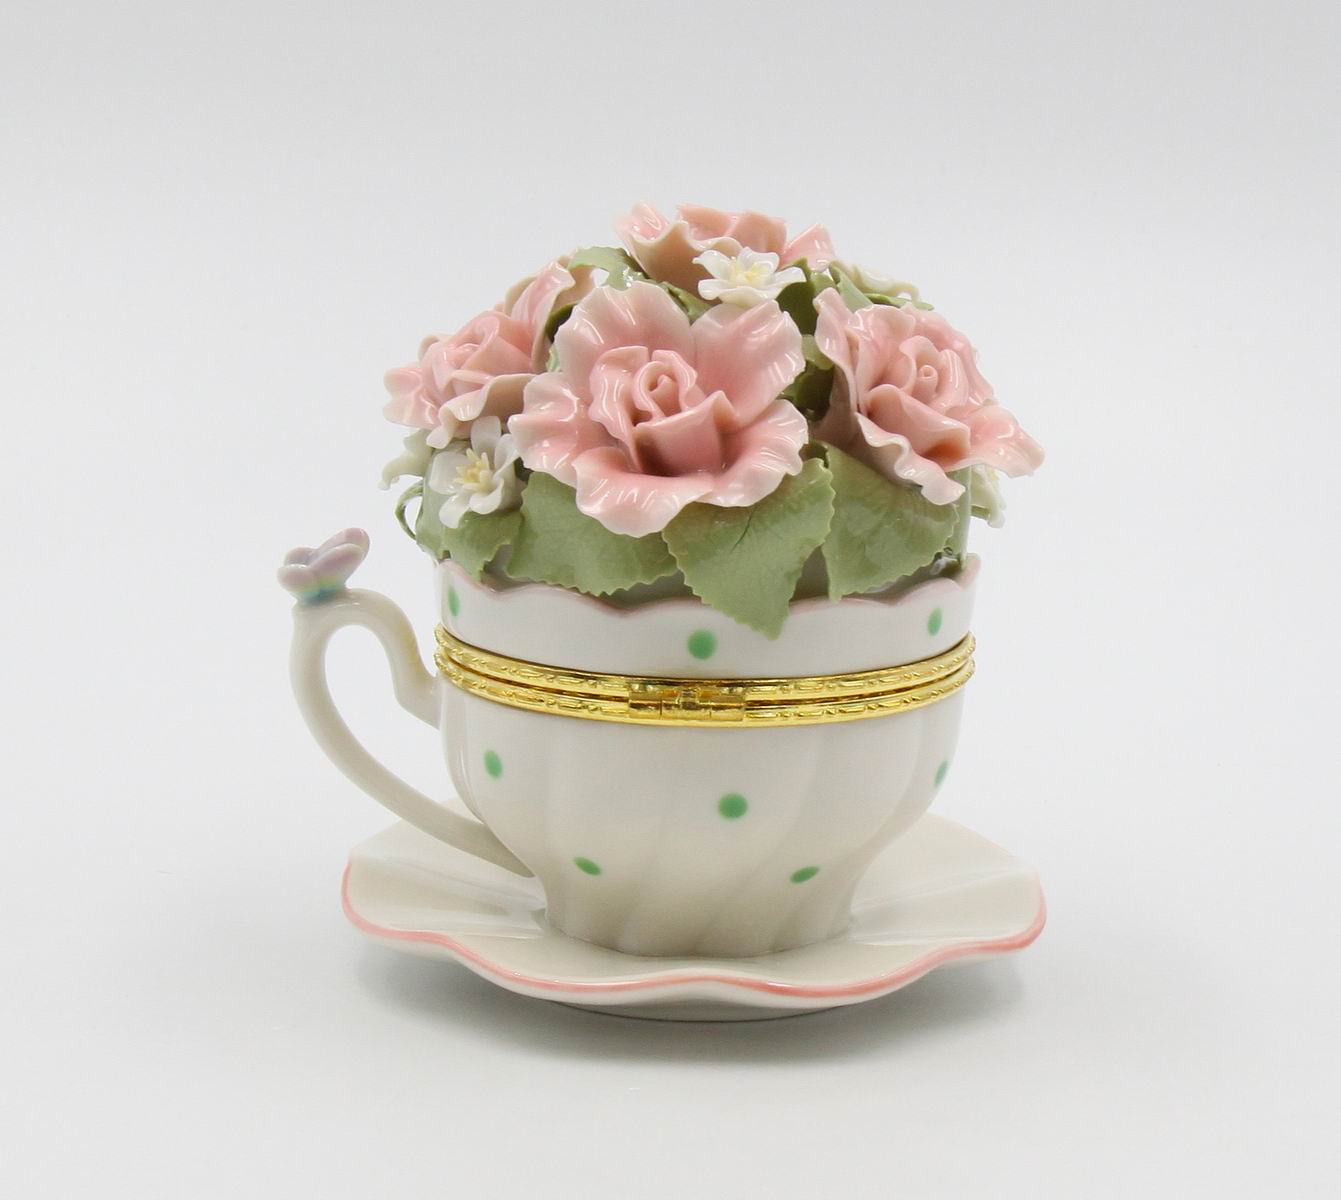 Cup and Saucer Shaped Hinge Box with Pink Flowers Music Box, Home Décor, Gift for Her, Gift for Mom, Mother's Day Gift